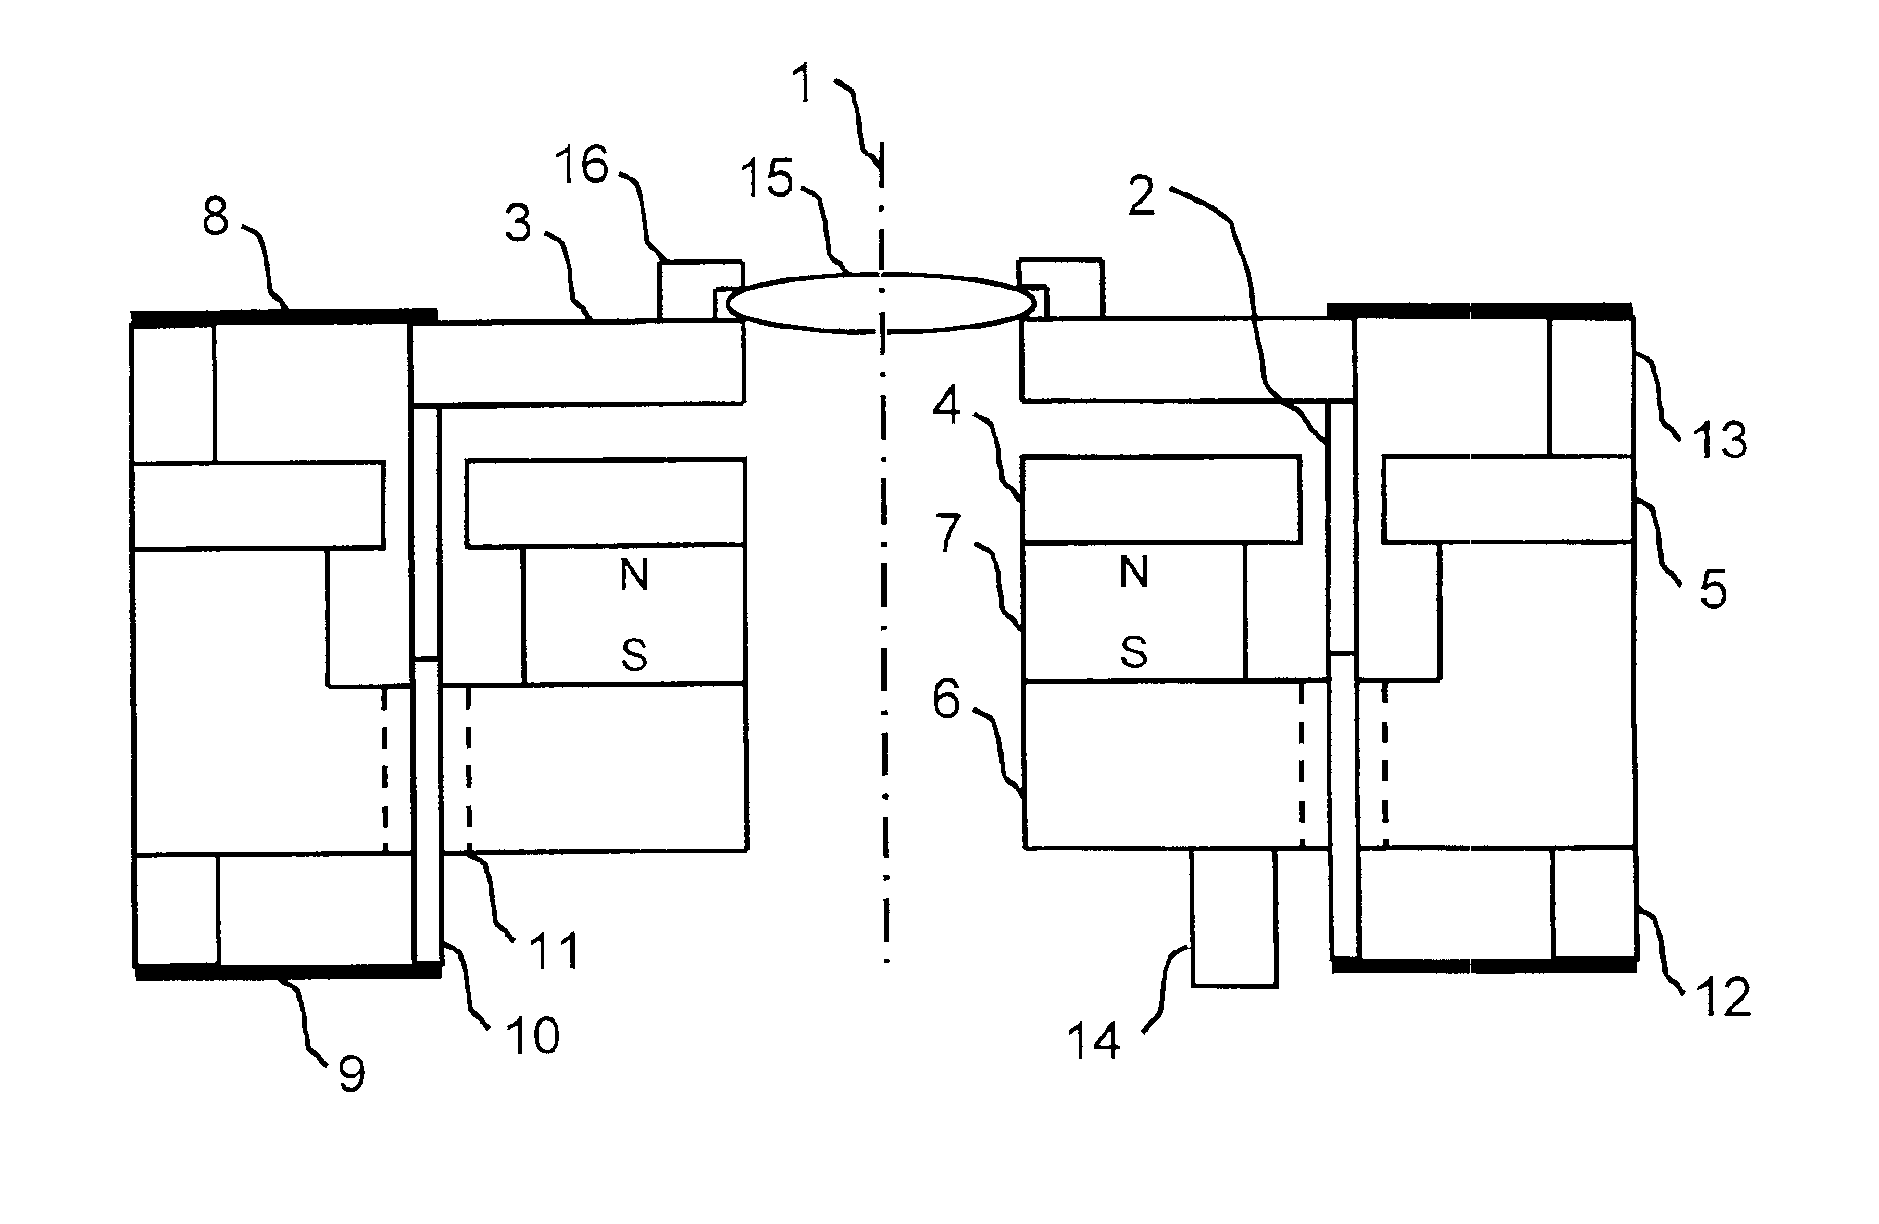 Moving coil linear motor positioning stage with a concentric aperture